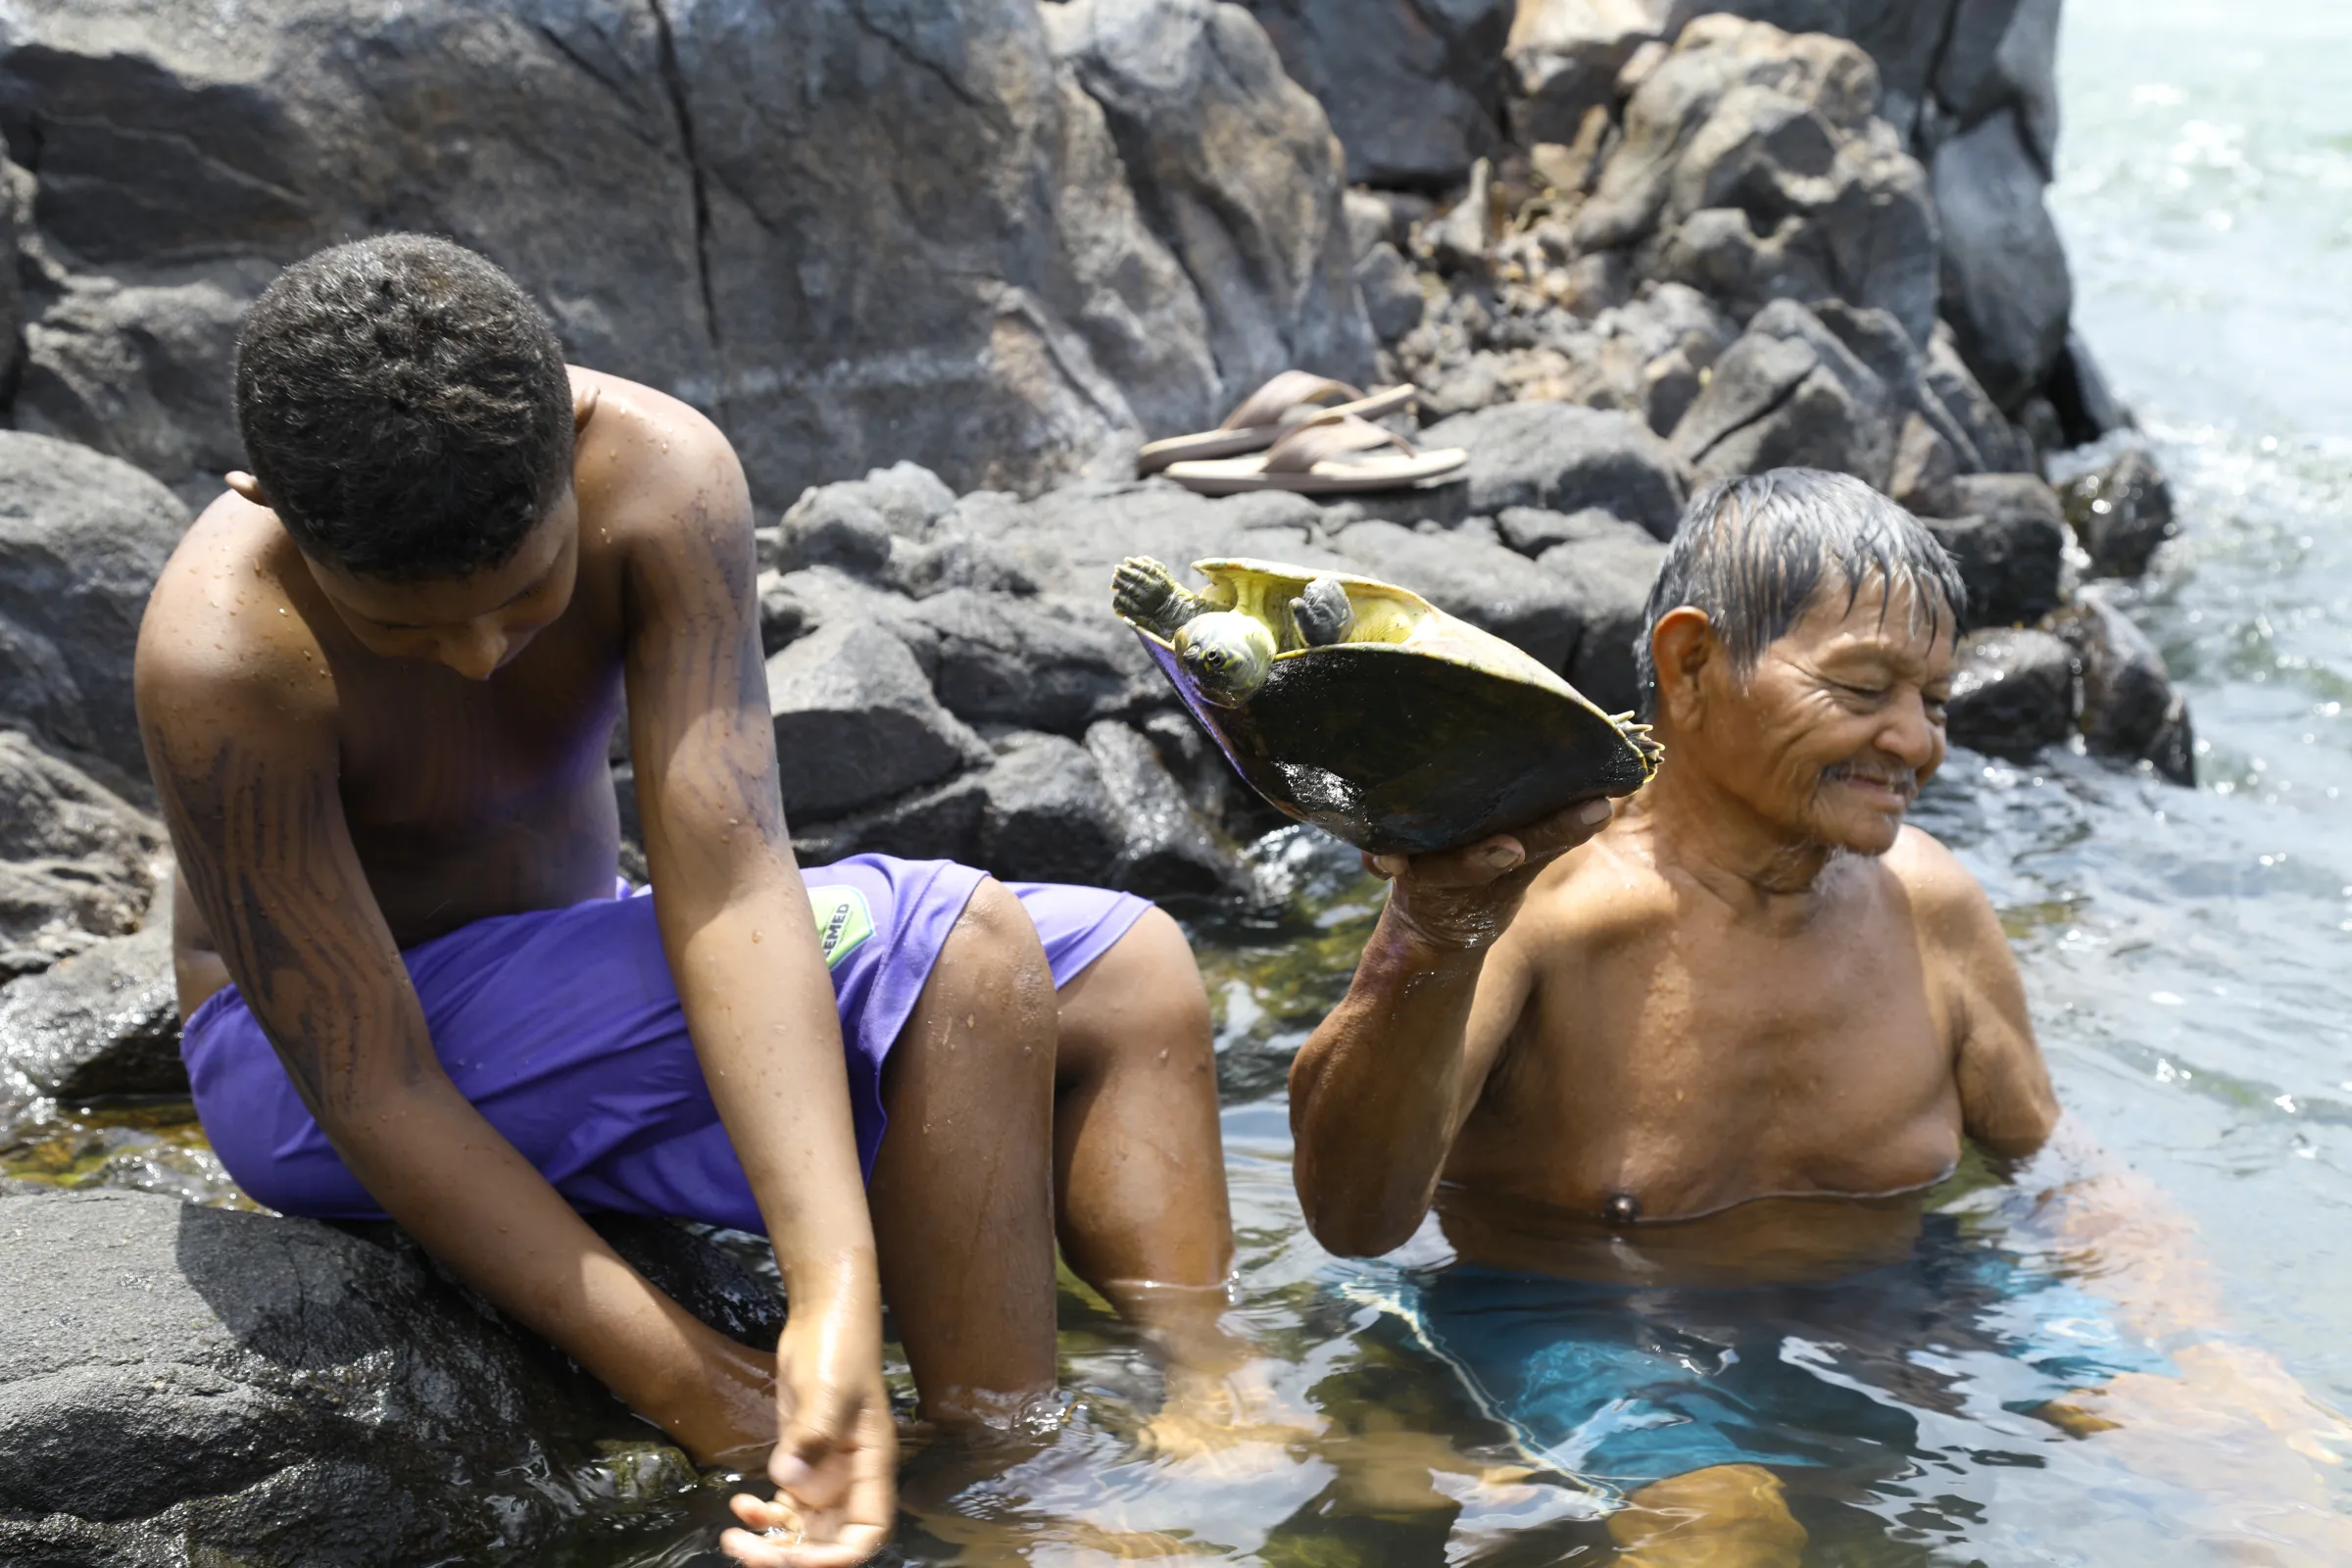 Old and young indigenous people hold tracajá turtles at Jericoa, a sacred site with a confluence of waterfalls and rapids on the Volta Grande in the River Xingu, Pará, Brazil, September 16, 2022. Thomson Reuters Foundation/Dan Collyns